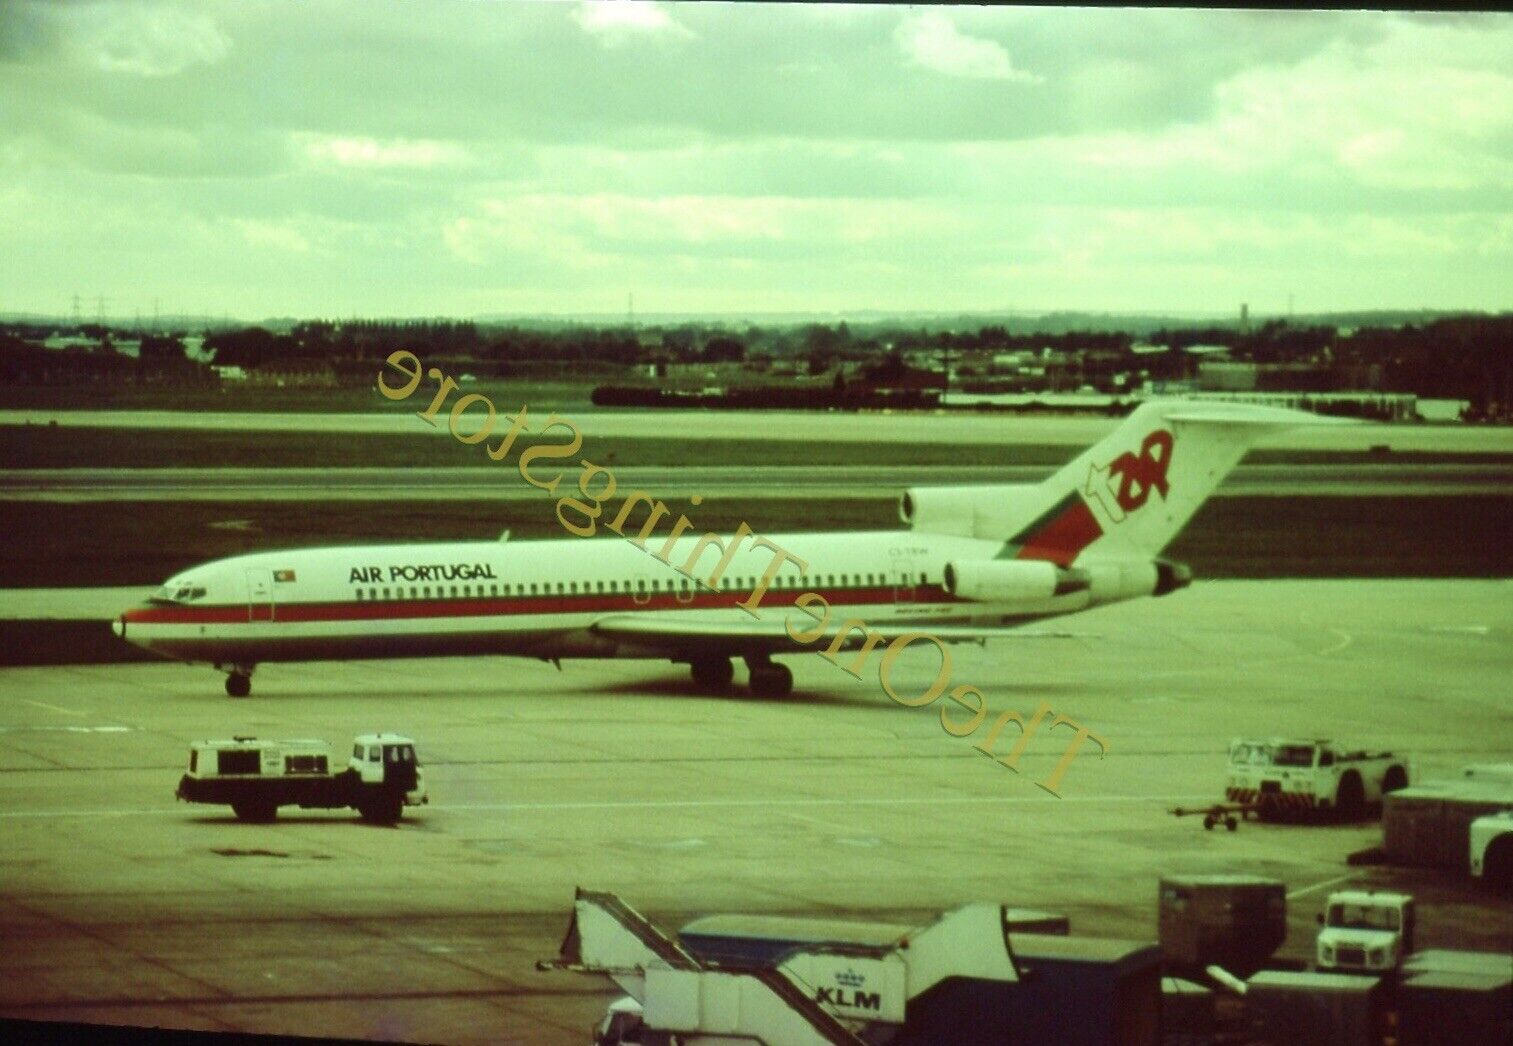 Air Portugal Chateauroux Airport 1980s 35mm Slide Vtg France Runway